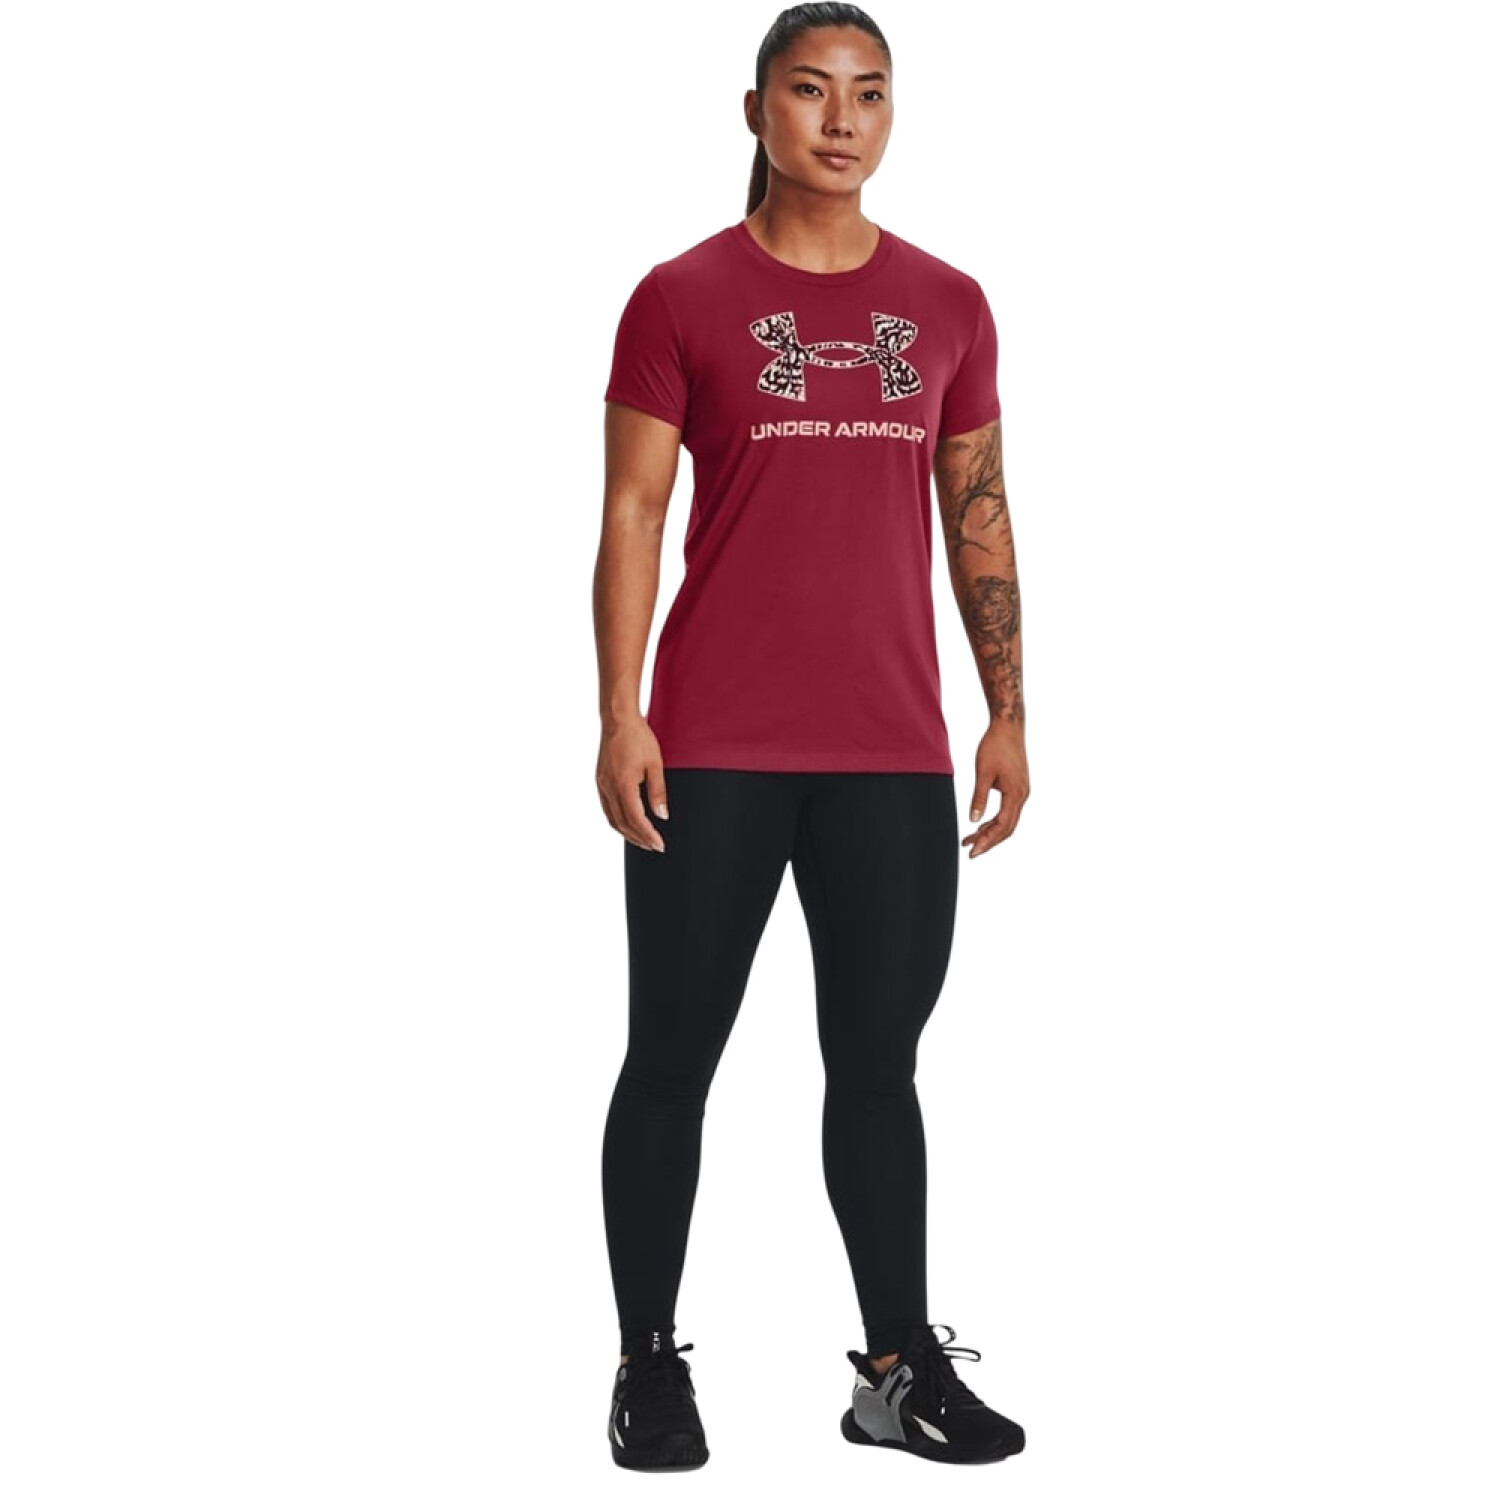 REMERA UNDER ARMOUR LIVE SPORTSTYLE MUJER - ICBC Mall